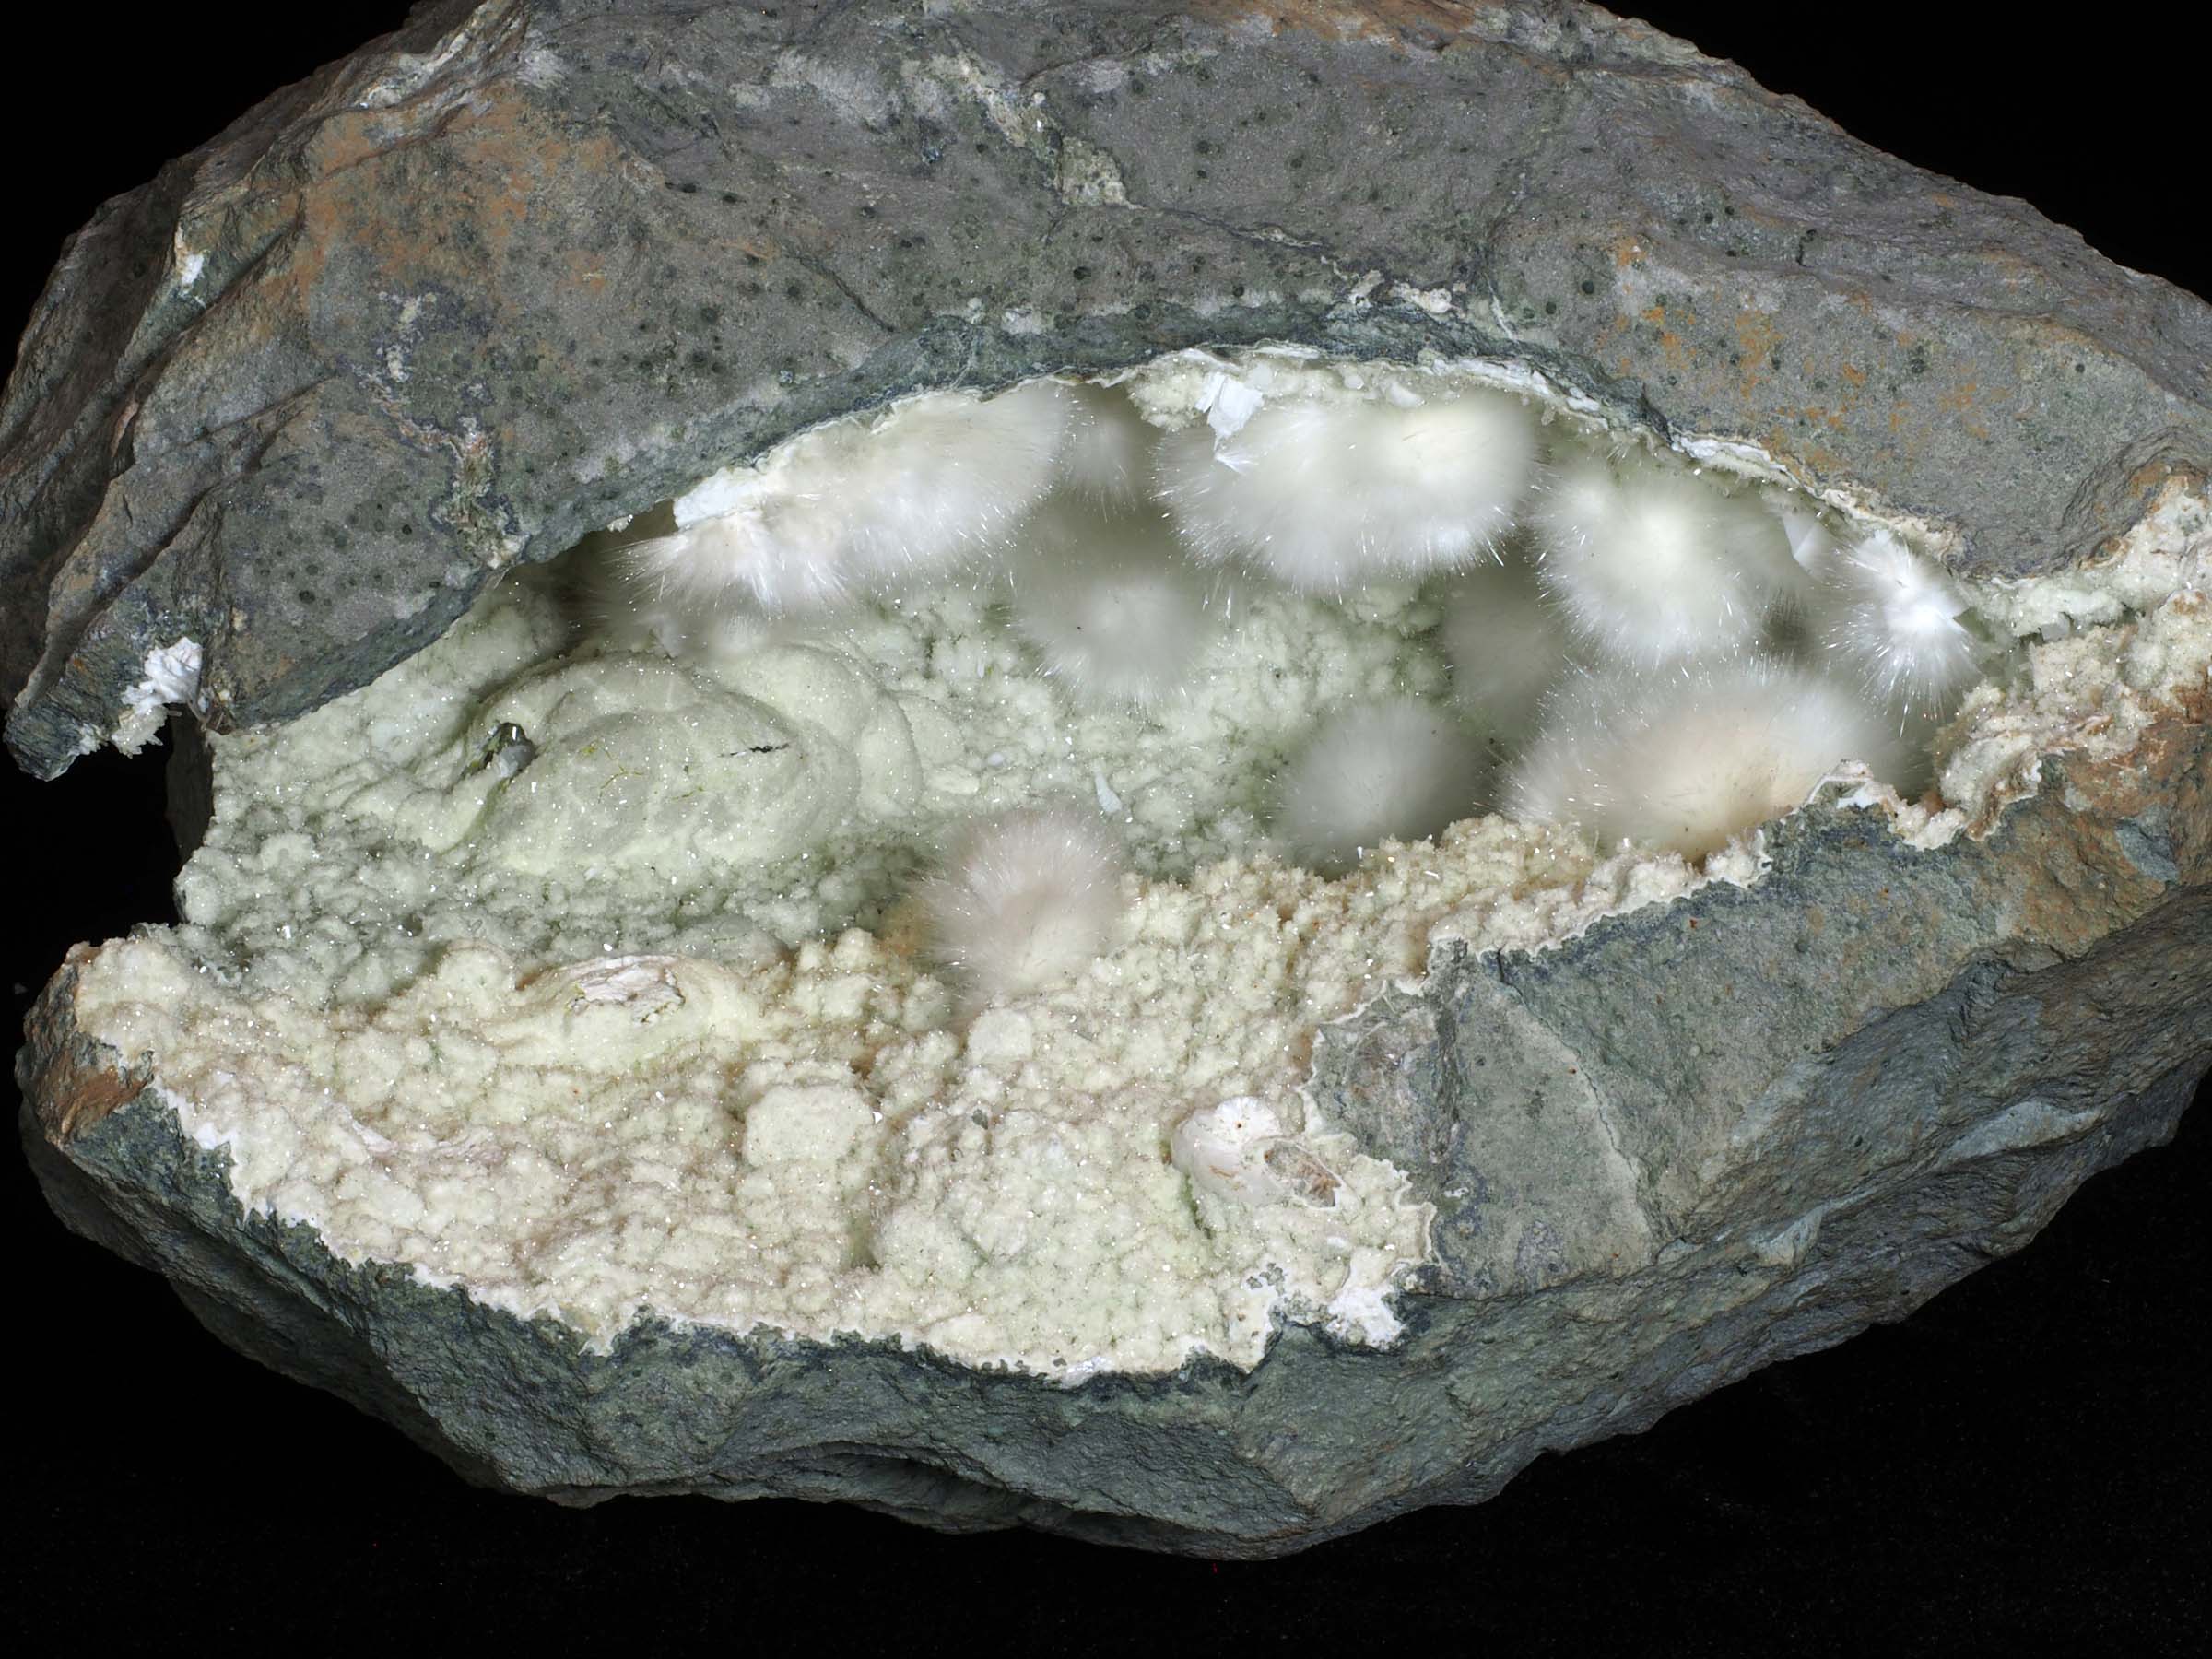 Geode with Okenite